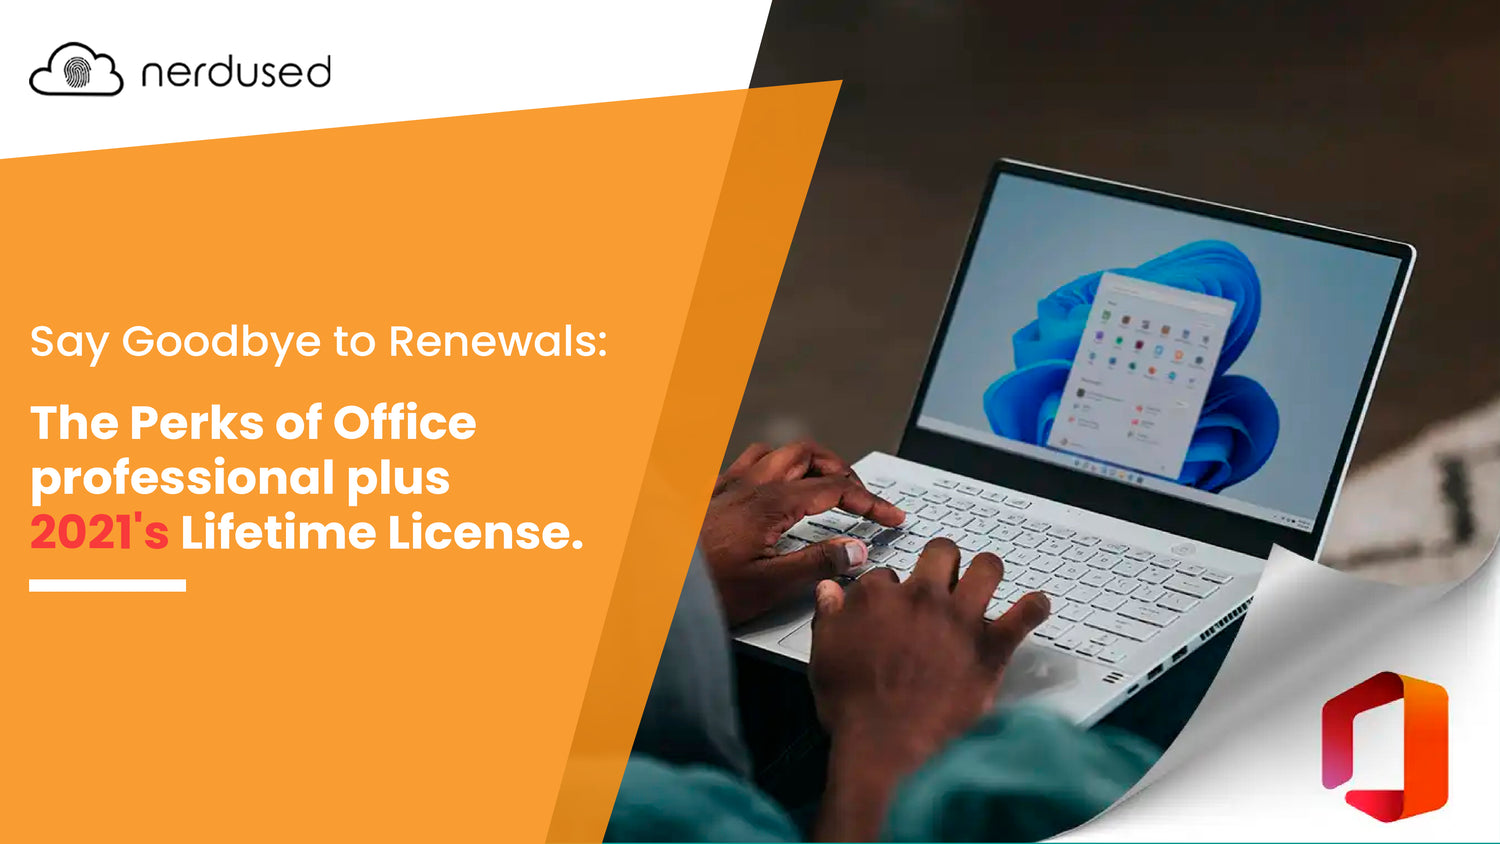 Say Goodbye to Renewals: The Perks of Office professional plus 2021's Lifetime License.